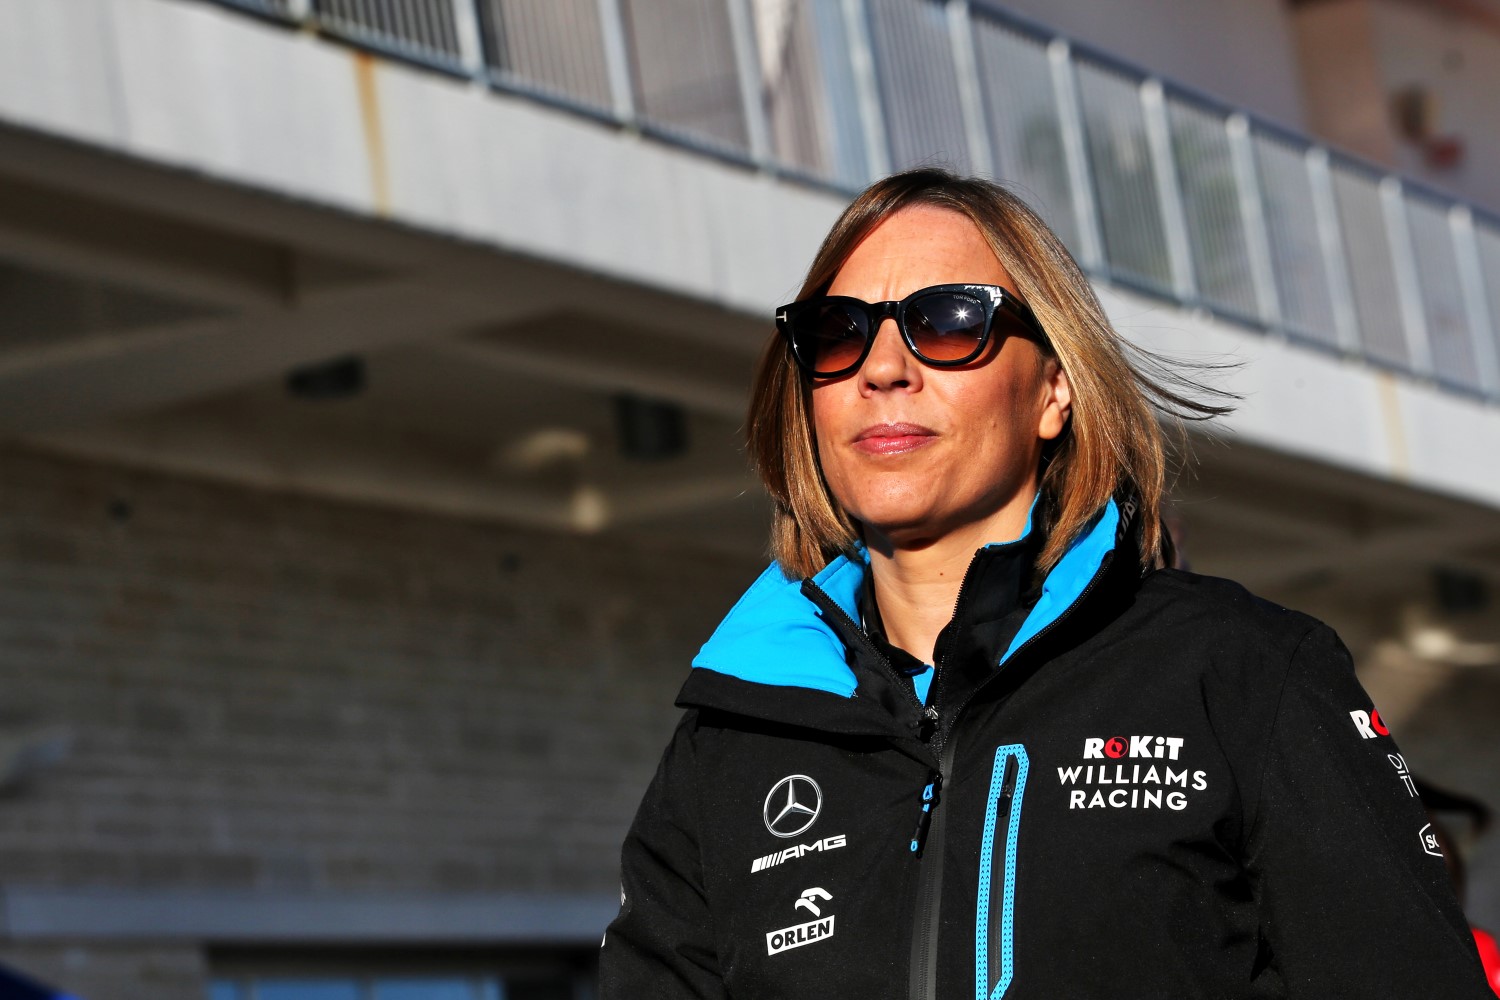 Having run her father's team into the ground, Claire Williams tries to blame sexism